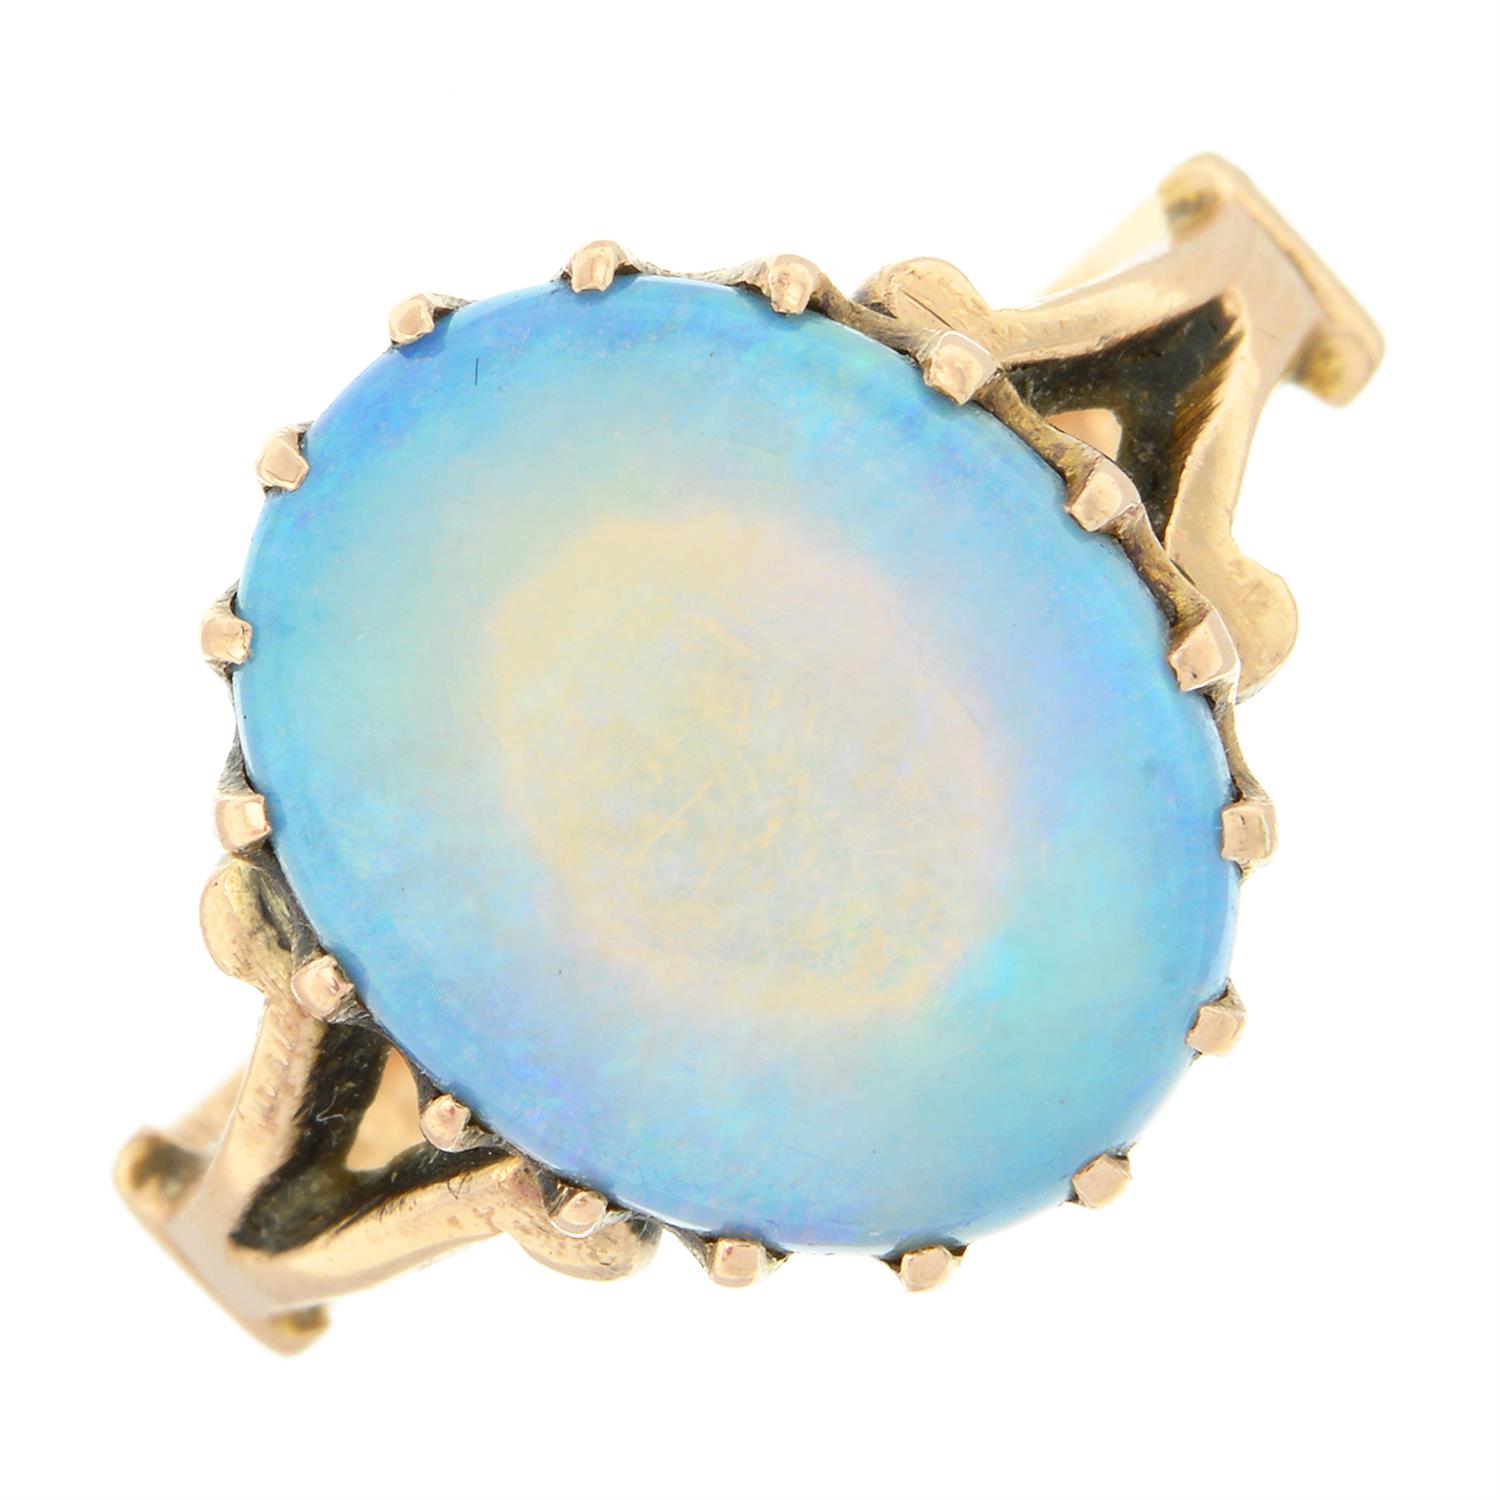 An early to mid 20th century gold opal single-stone ring.